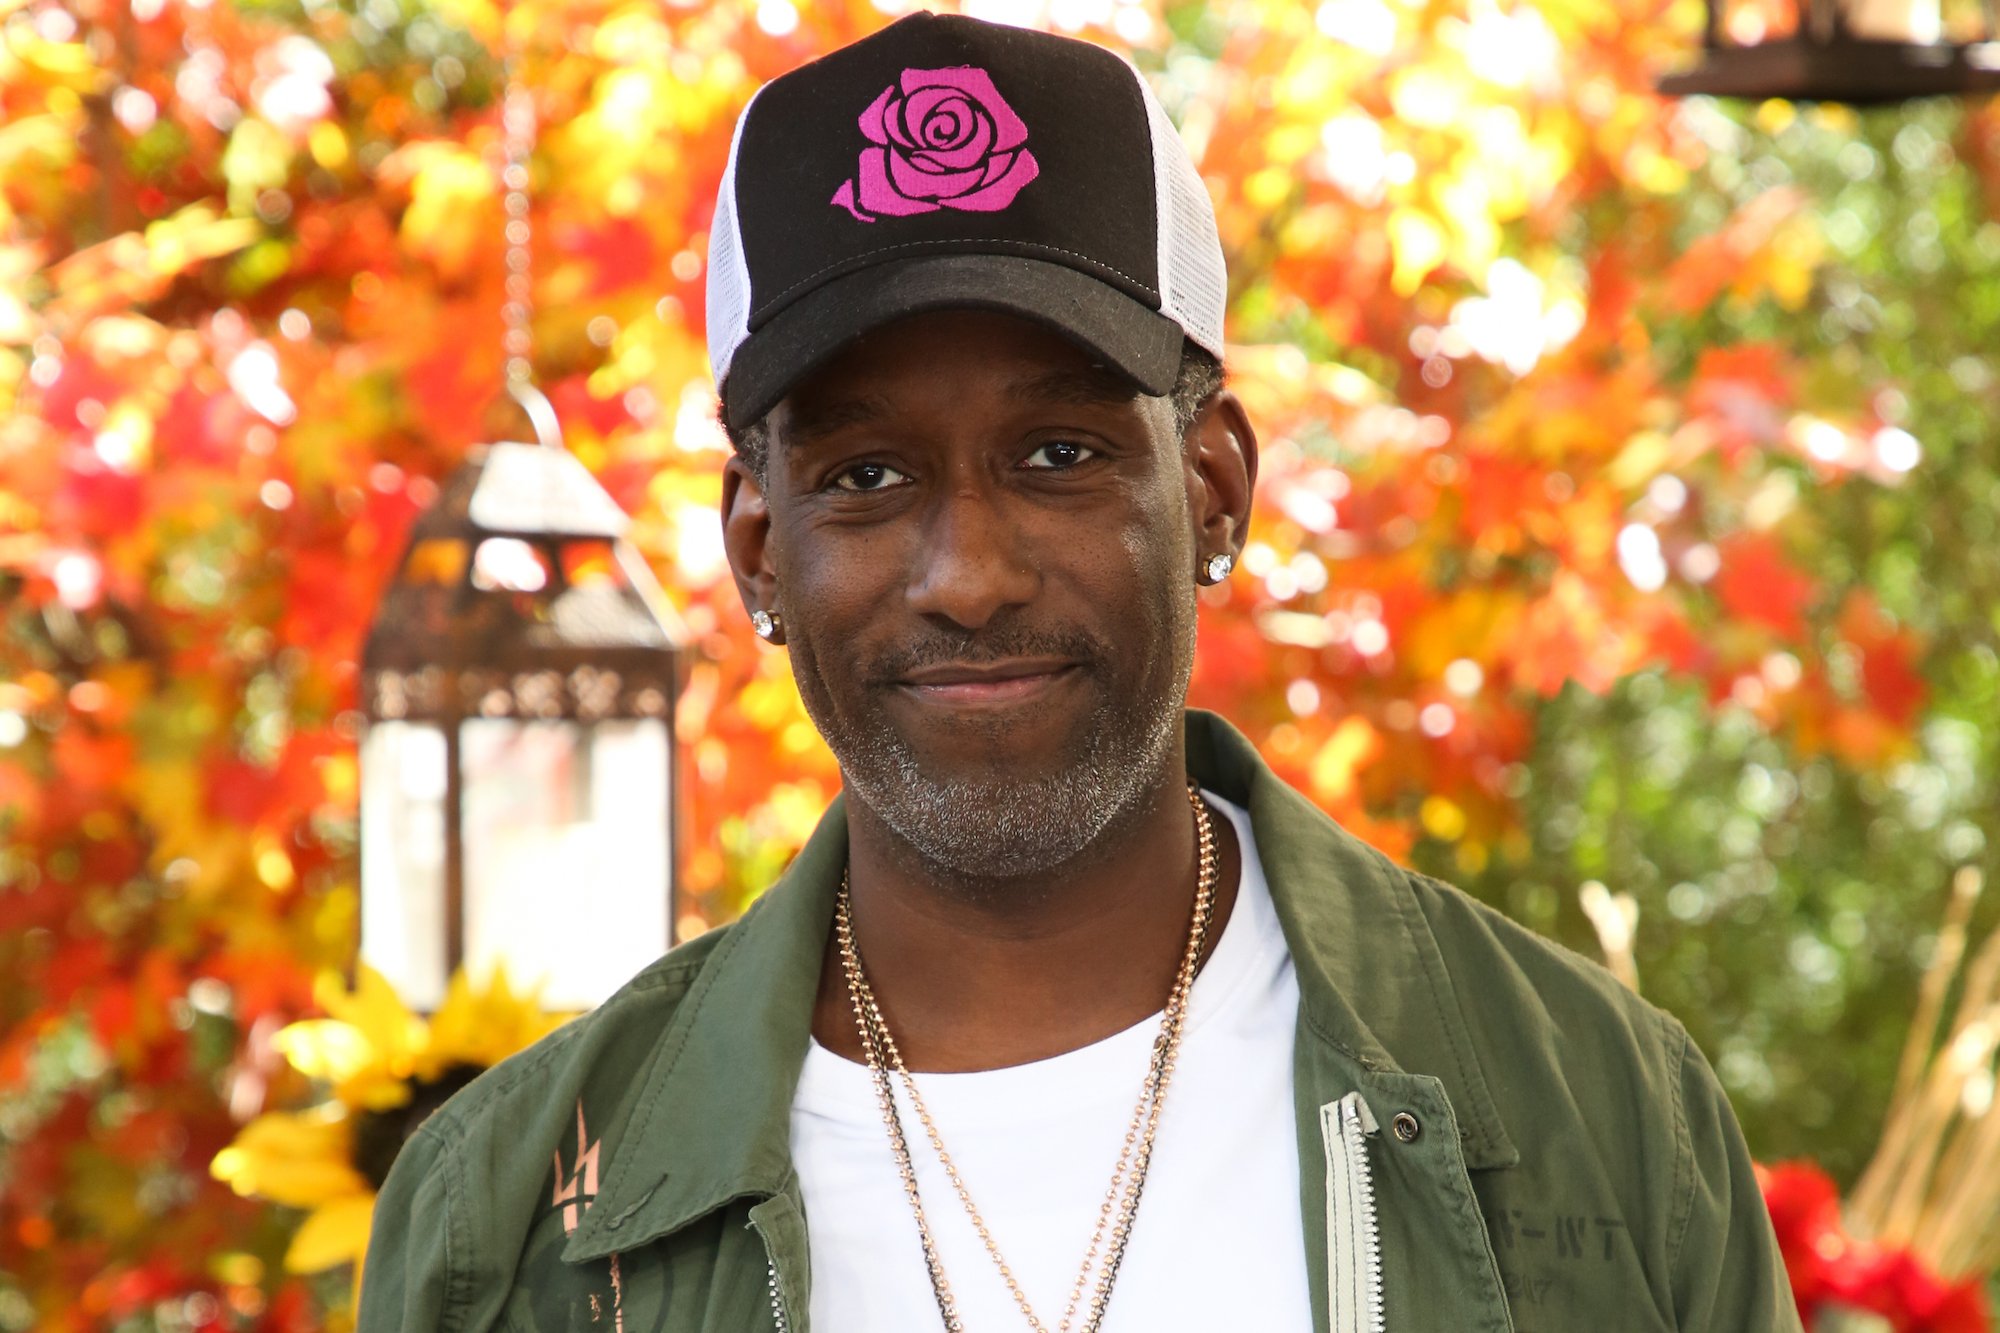 Shawn Stockman smiling in front of fall foliage